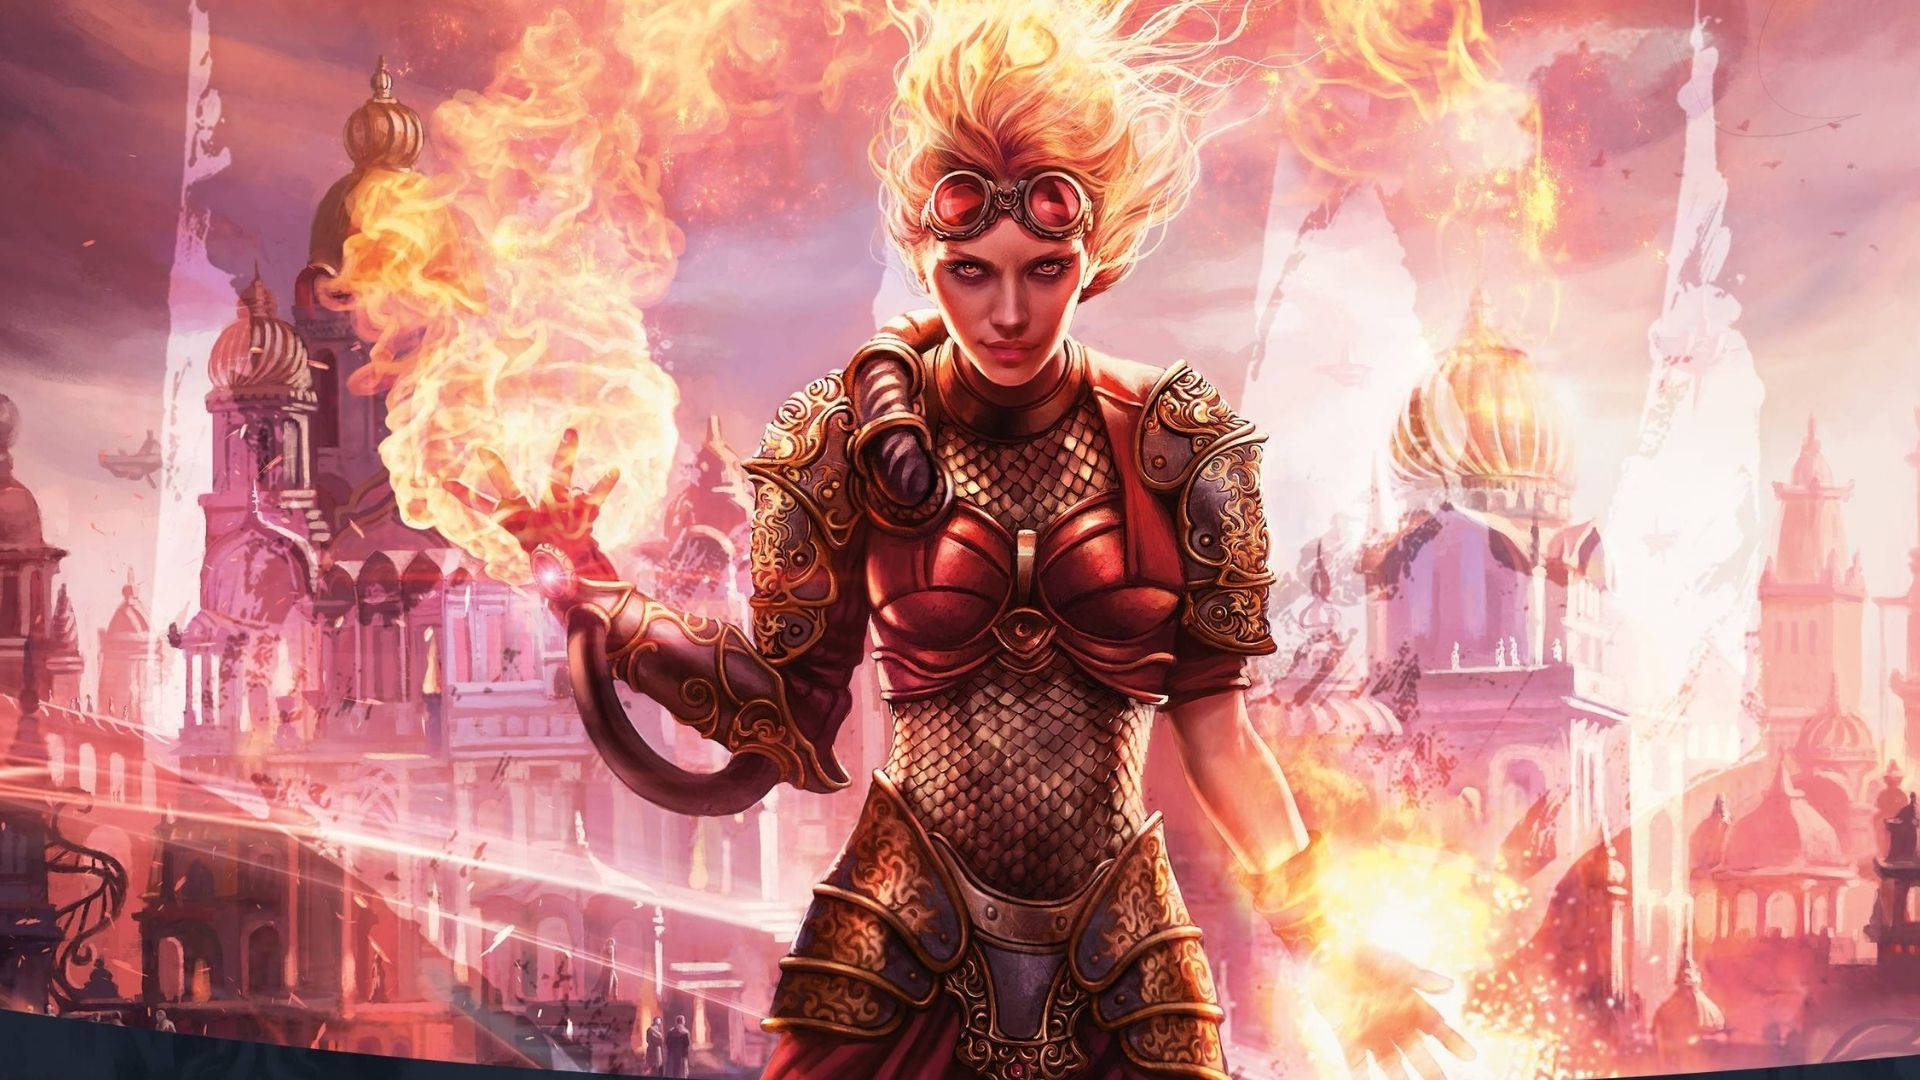 Courageous Fire Girl In Action Background